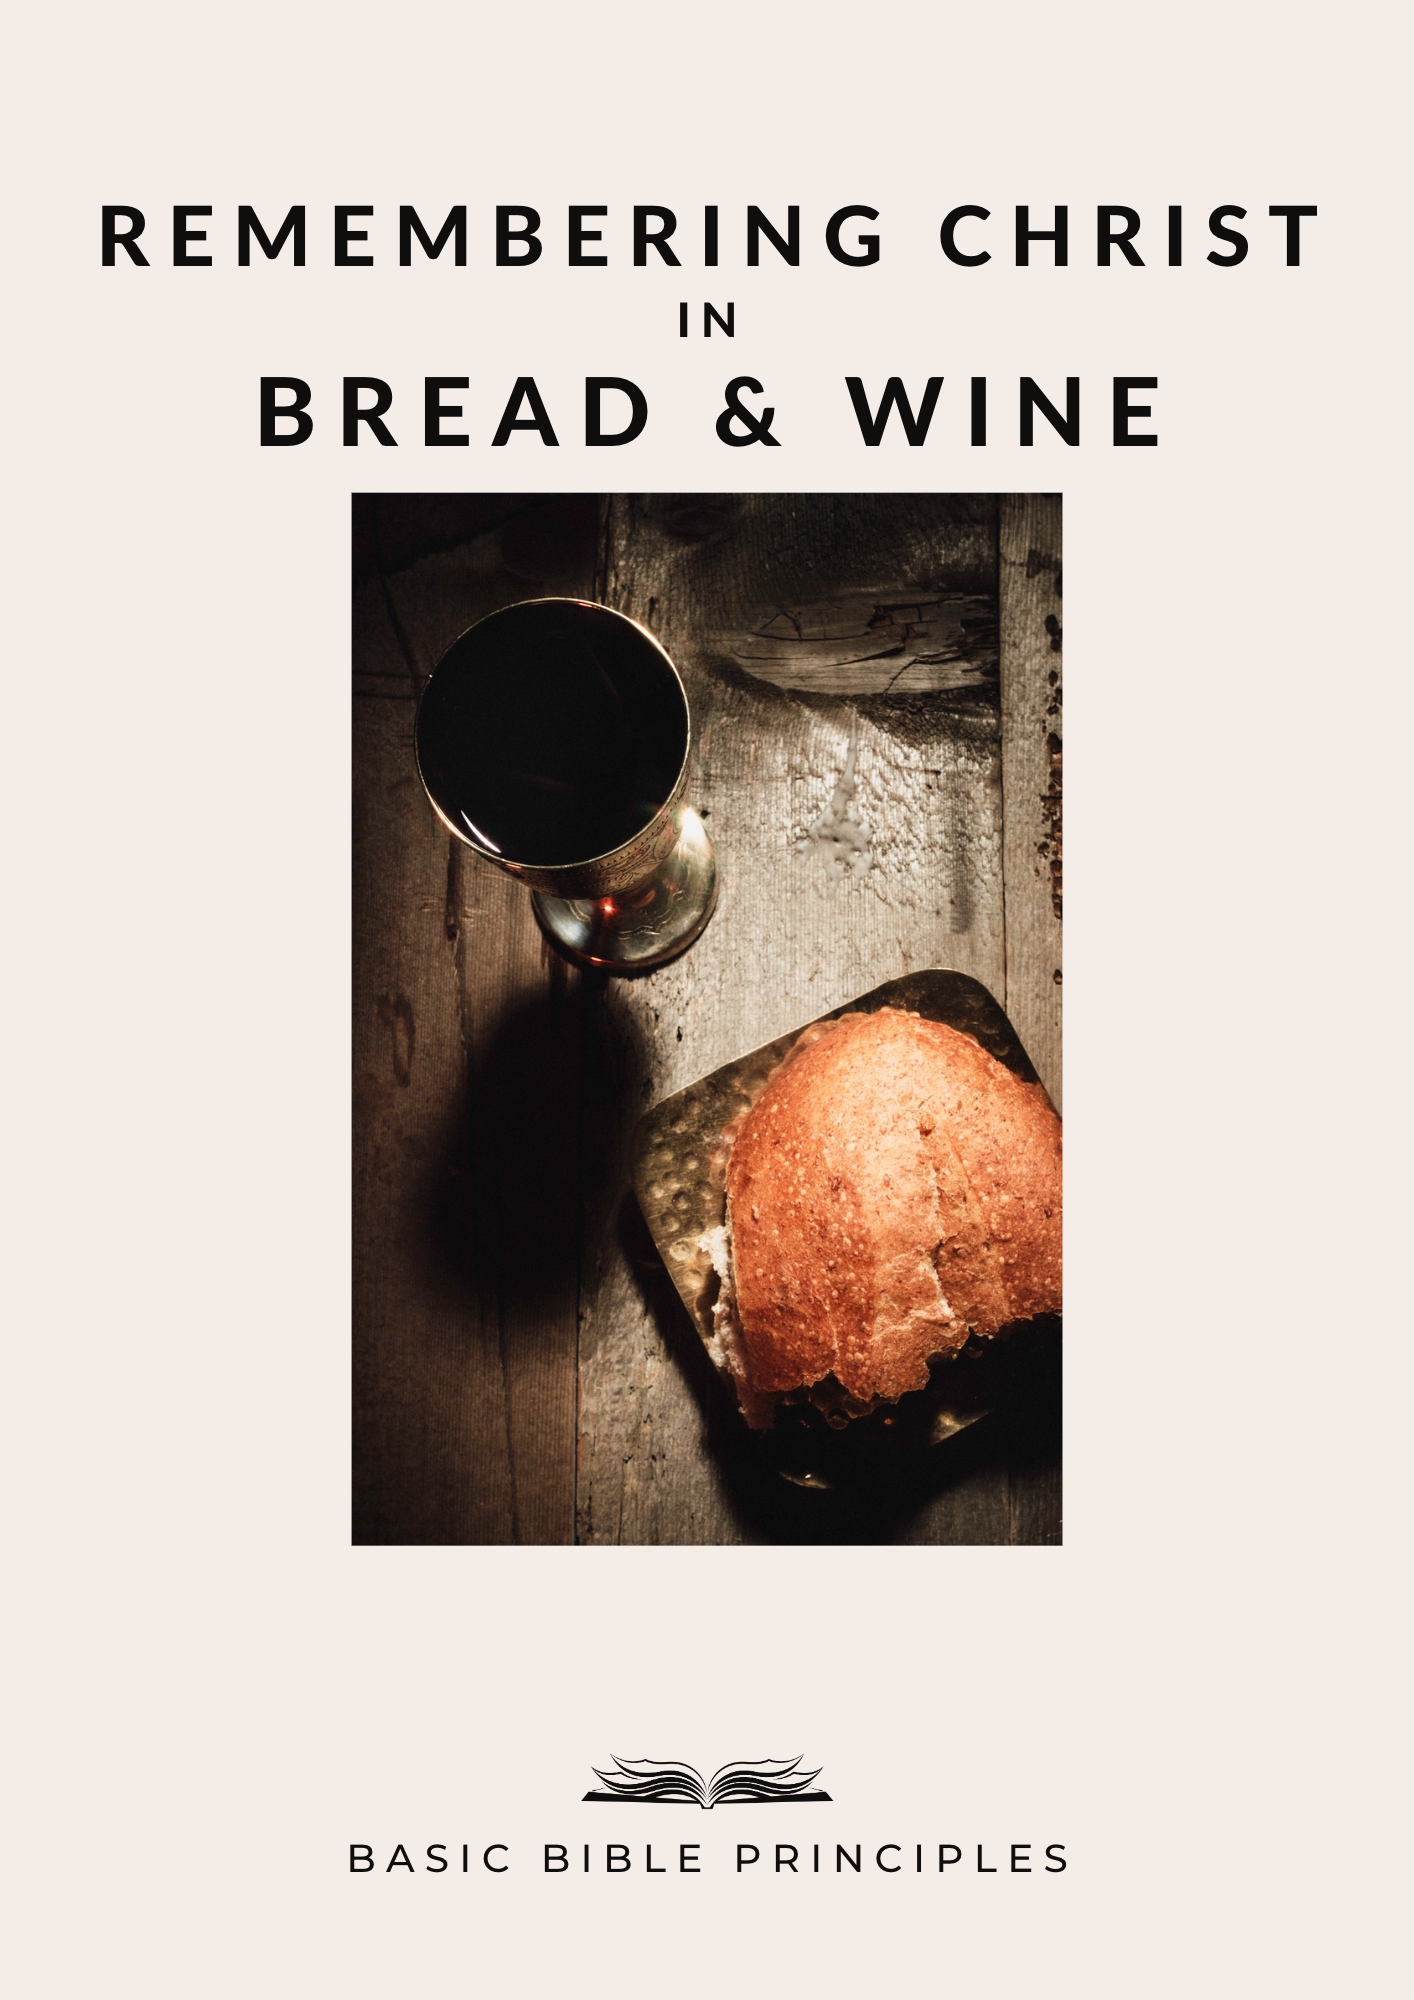 Basic Bible Principles:  REMEMBERING CHRIST IN BREAD AND WINE